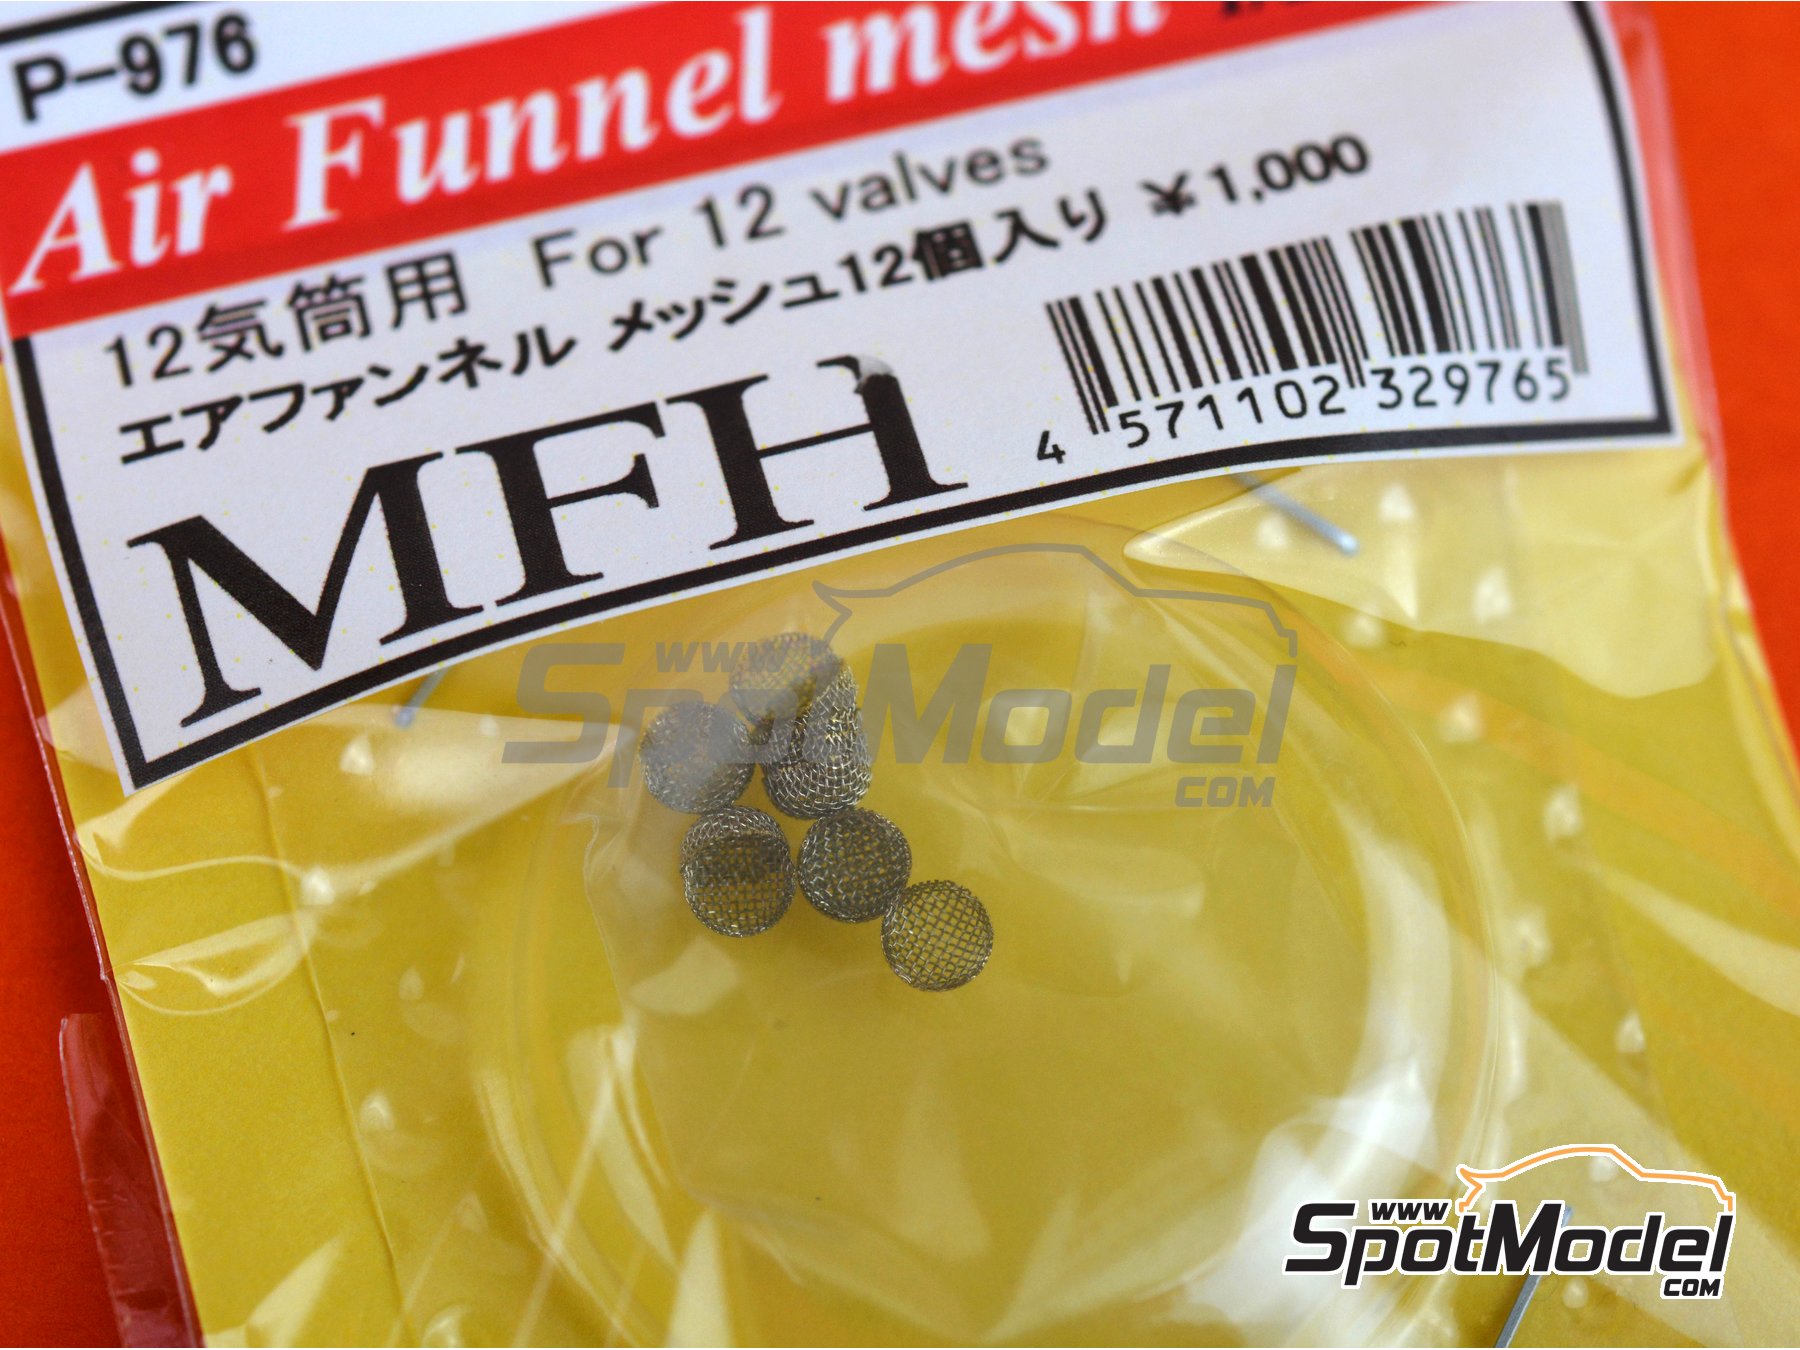 Air Funnel Mesh for 12 cylinder engines. Mesh in 1/20 scale manufactured by  Model Factory Hiro (ref. MFH-P976, also 4571102329765 and P976)